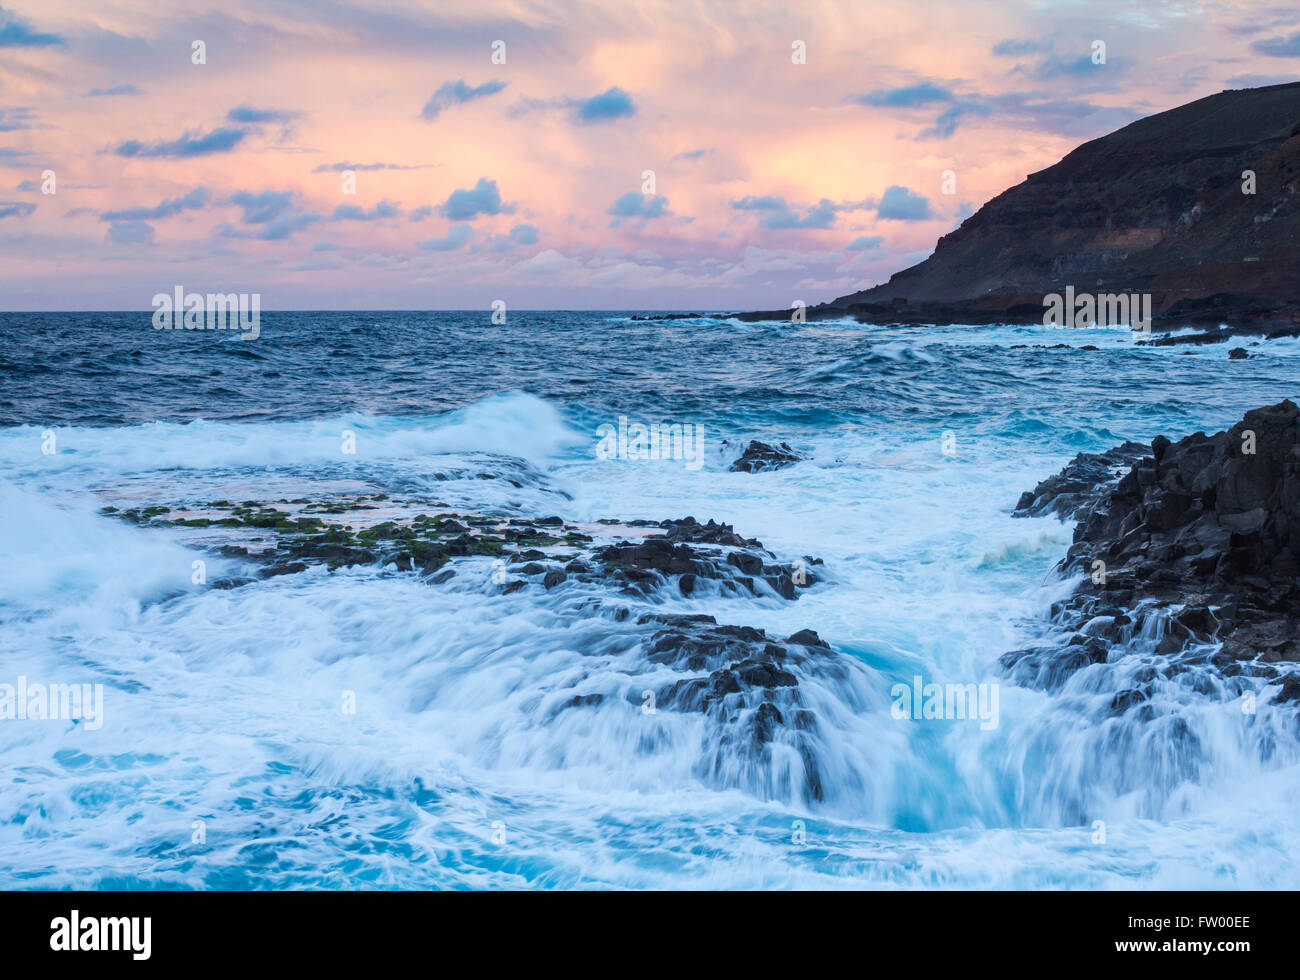 Las Palmas, Gran Canaria, Canary Islands, Spain, 30th March 2016. Weather: Warnings have been issued for heavy rain and rough seas as a mass of cold air sweeps across the Canary Islands. PICTURED: a stormy Atlantic Ocean on the rugged north coast of Gran Canaria at sunset Credit:  Alan Dawson News/Alamy Live News Stock Photo